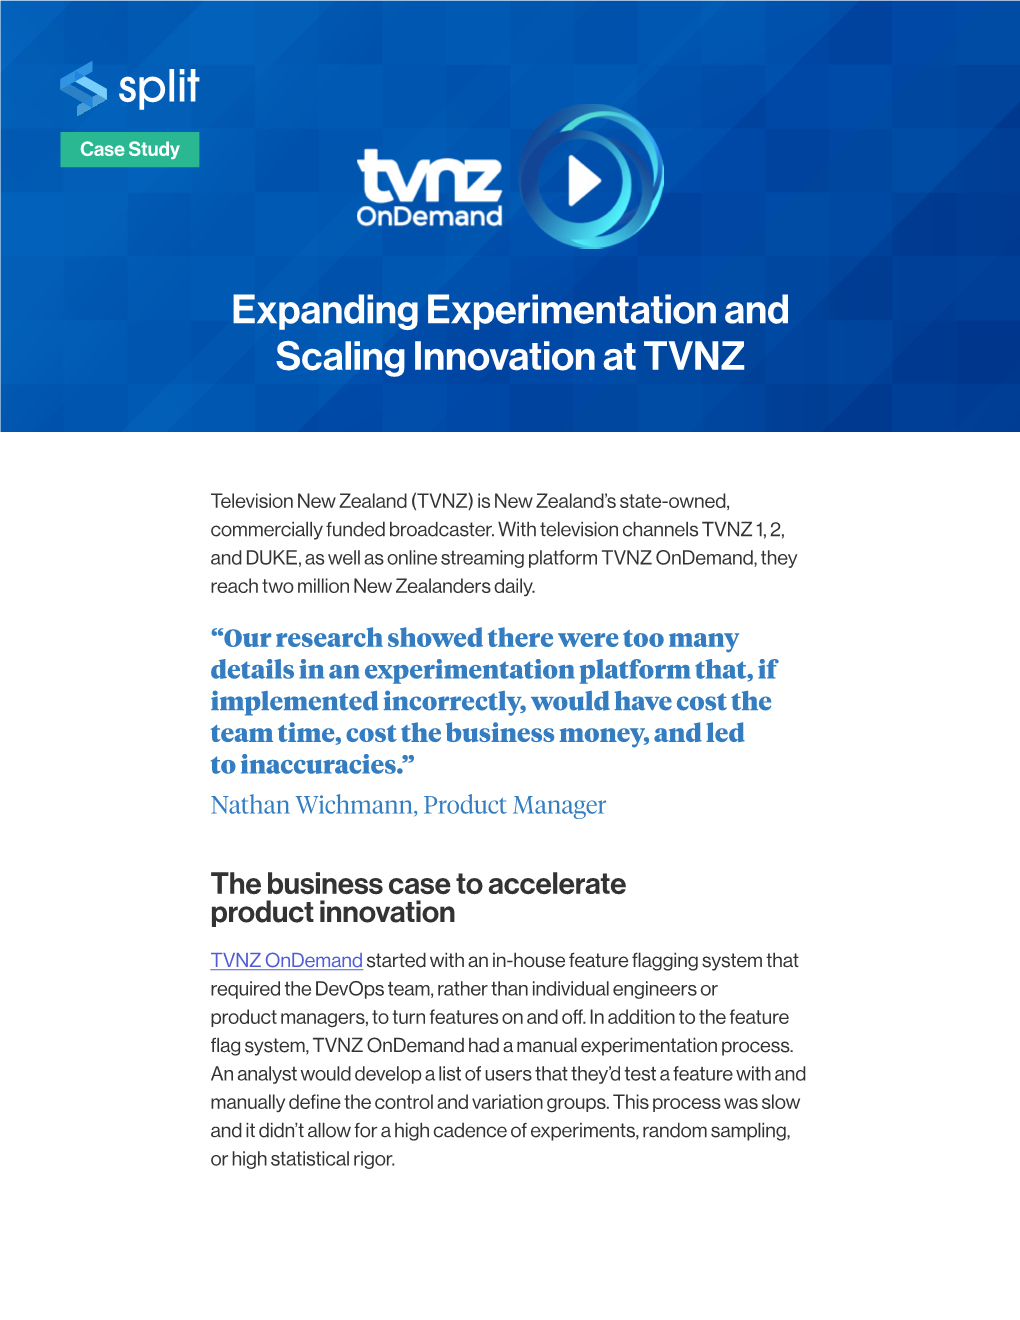 Expanding Experimentation and Scaling Innovation at TVNZ